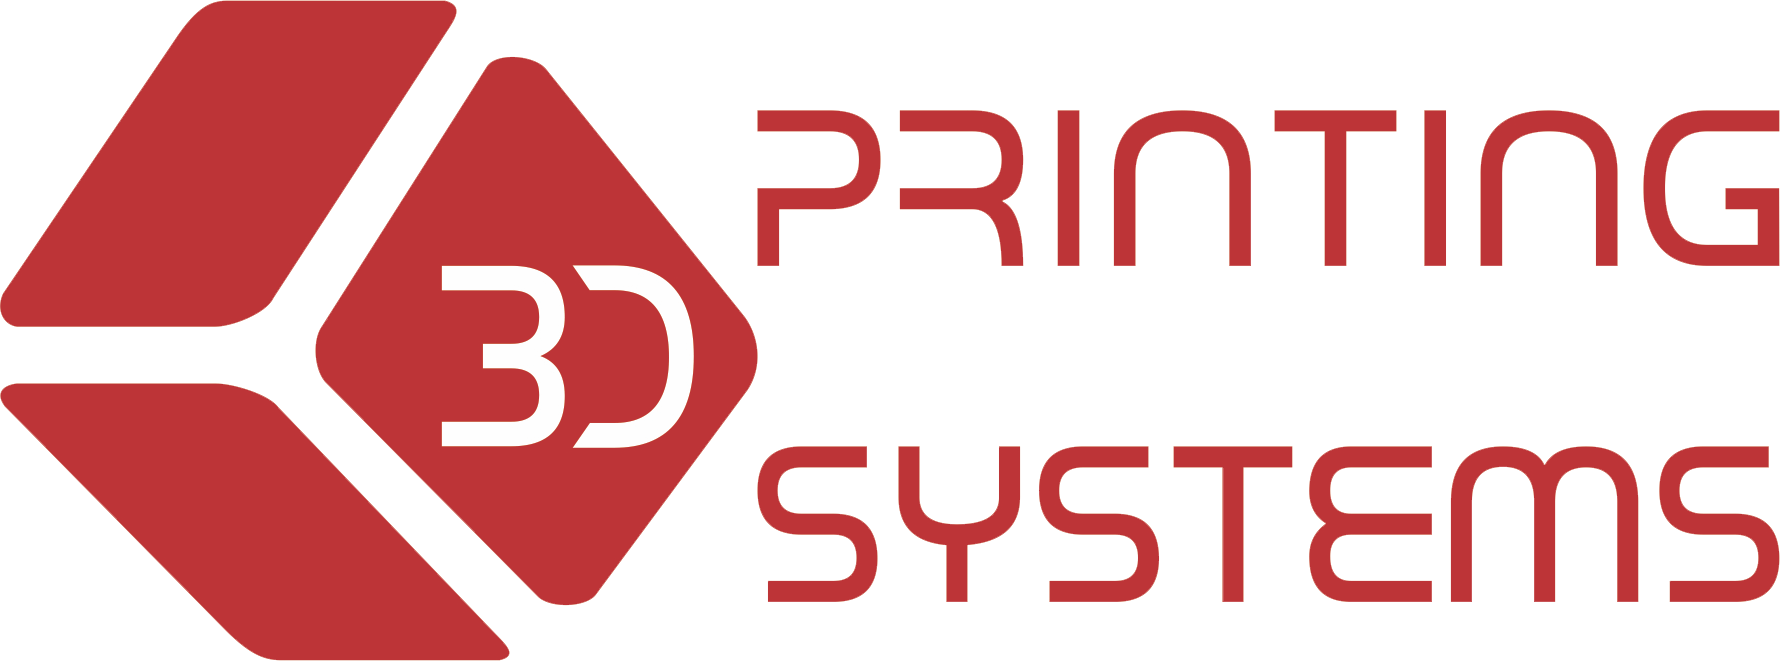 Best Printing Logo - 3D Printing Systems | Desktop 3D Printers and more...